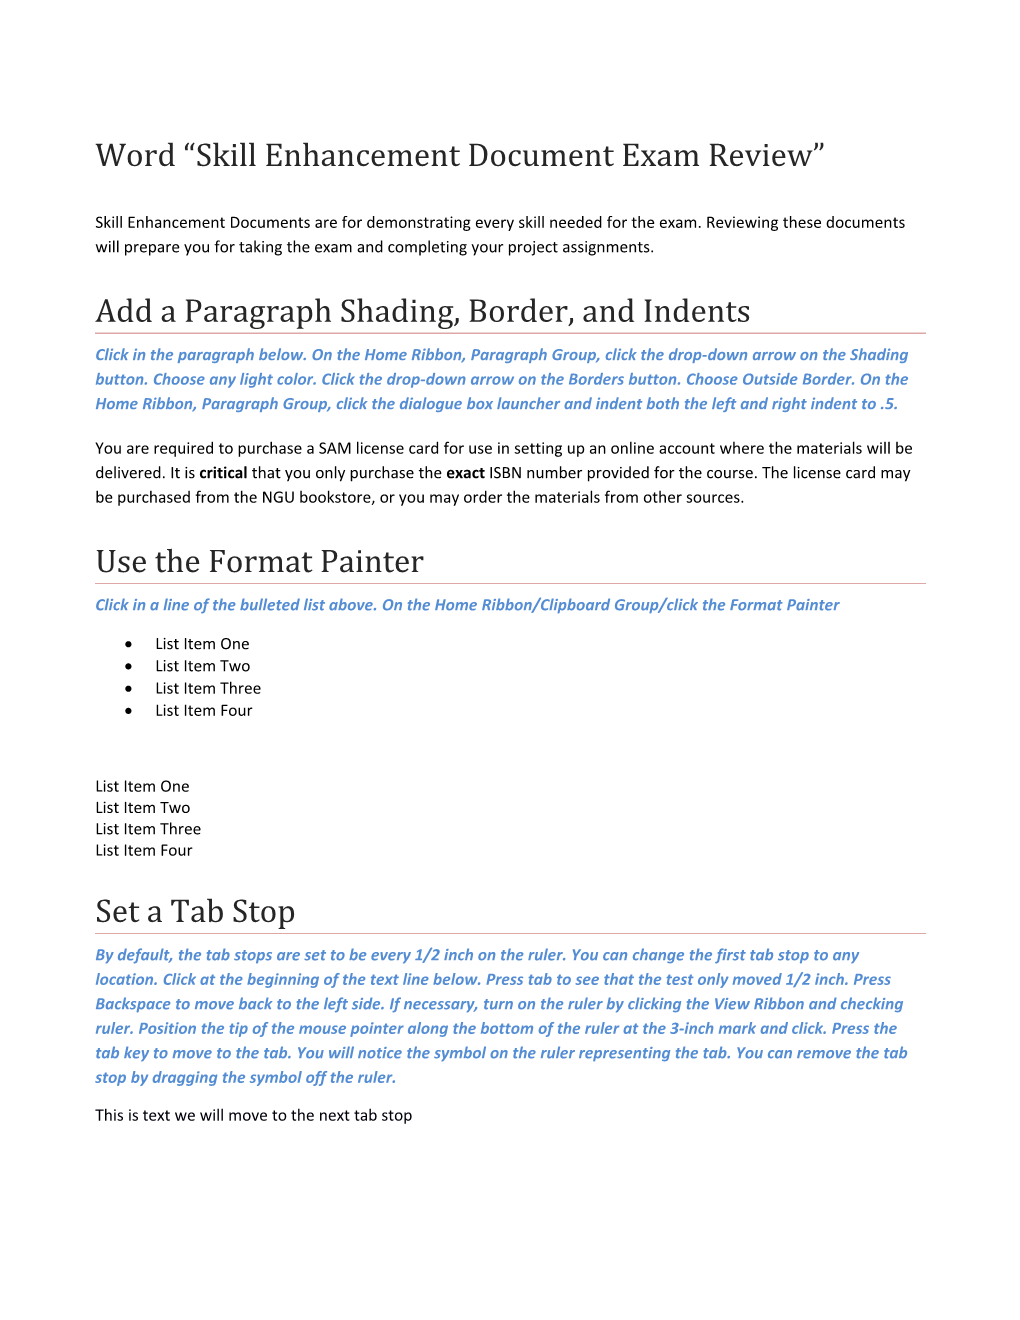 Word Skill Enhancement Document Exam Review